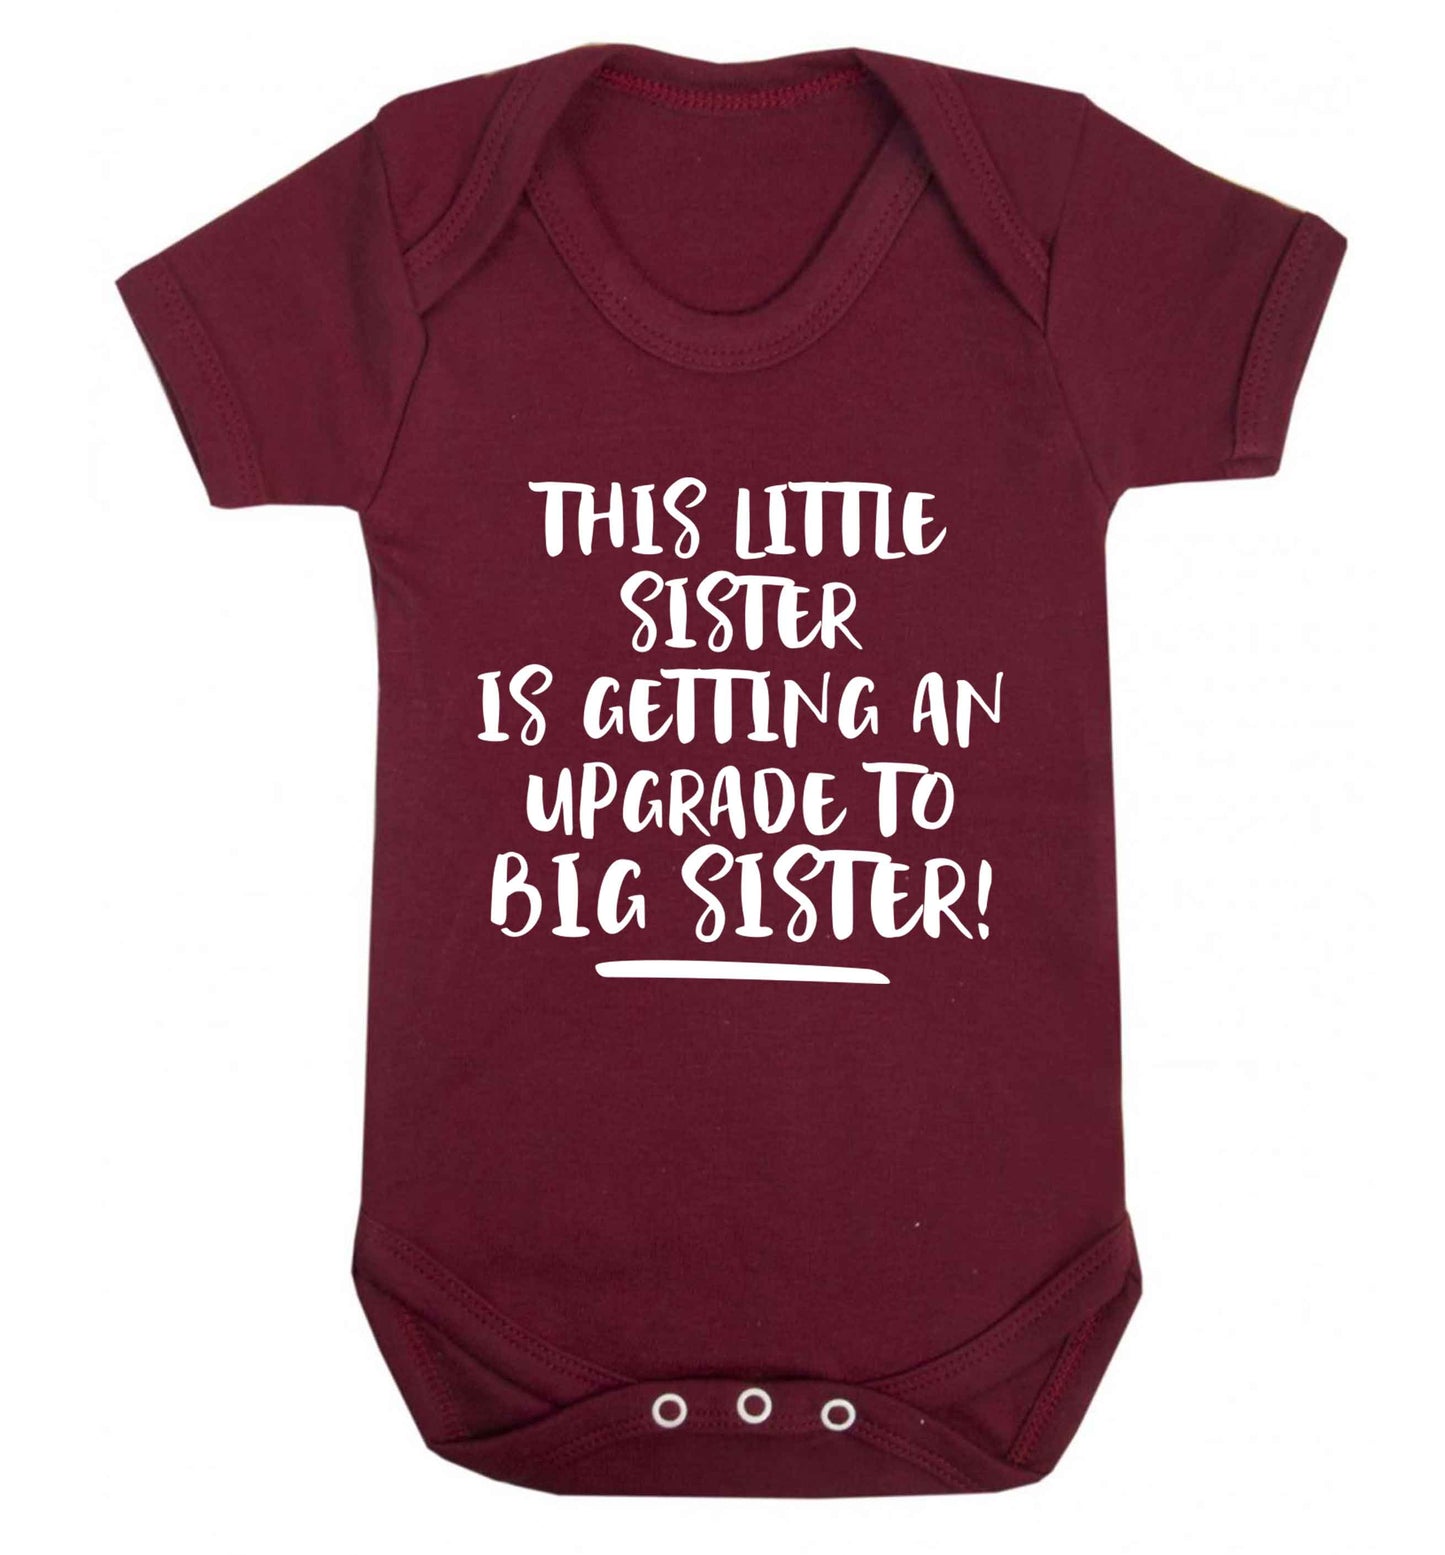 This little sister is getting an upgrade to big sister! Baby Vest maroon 18-24 months